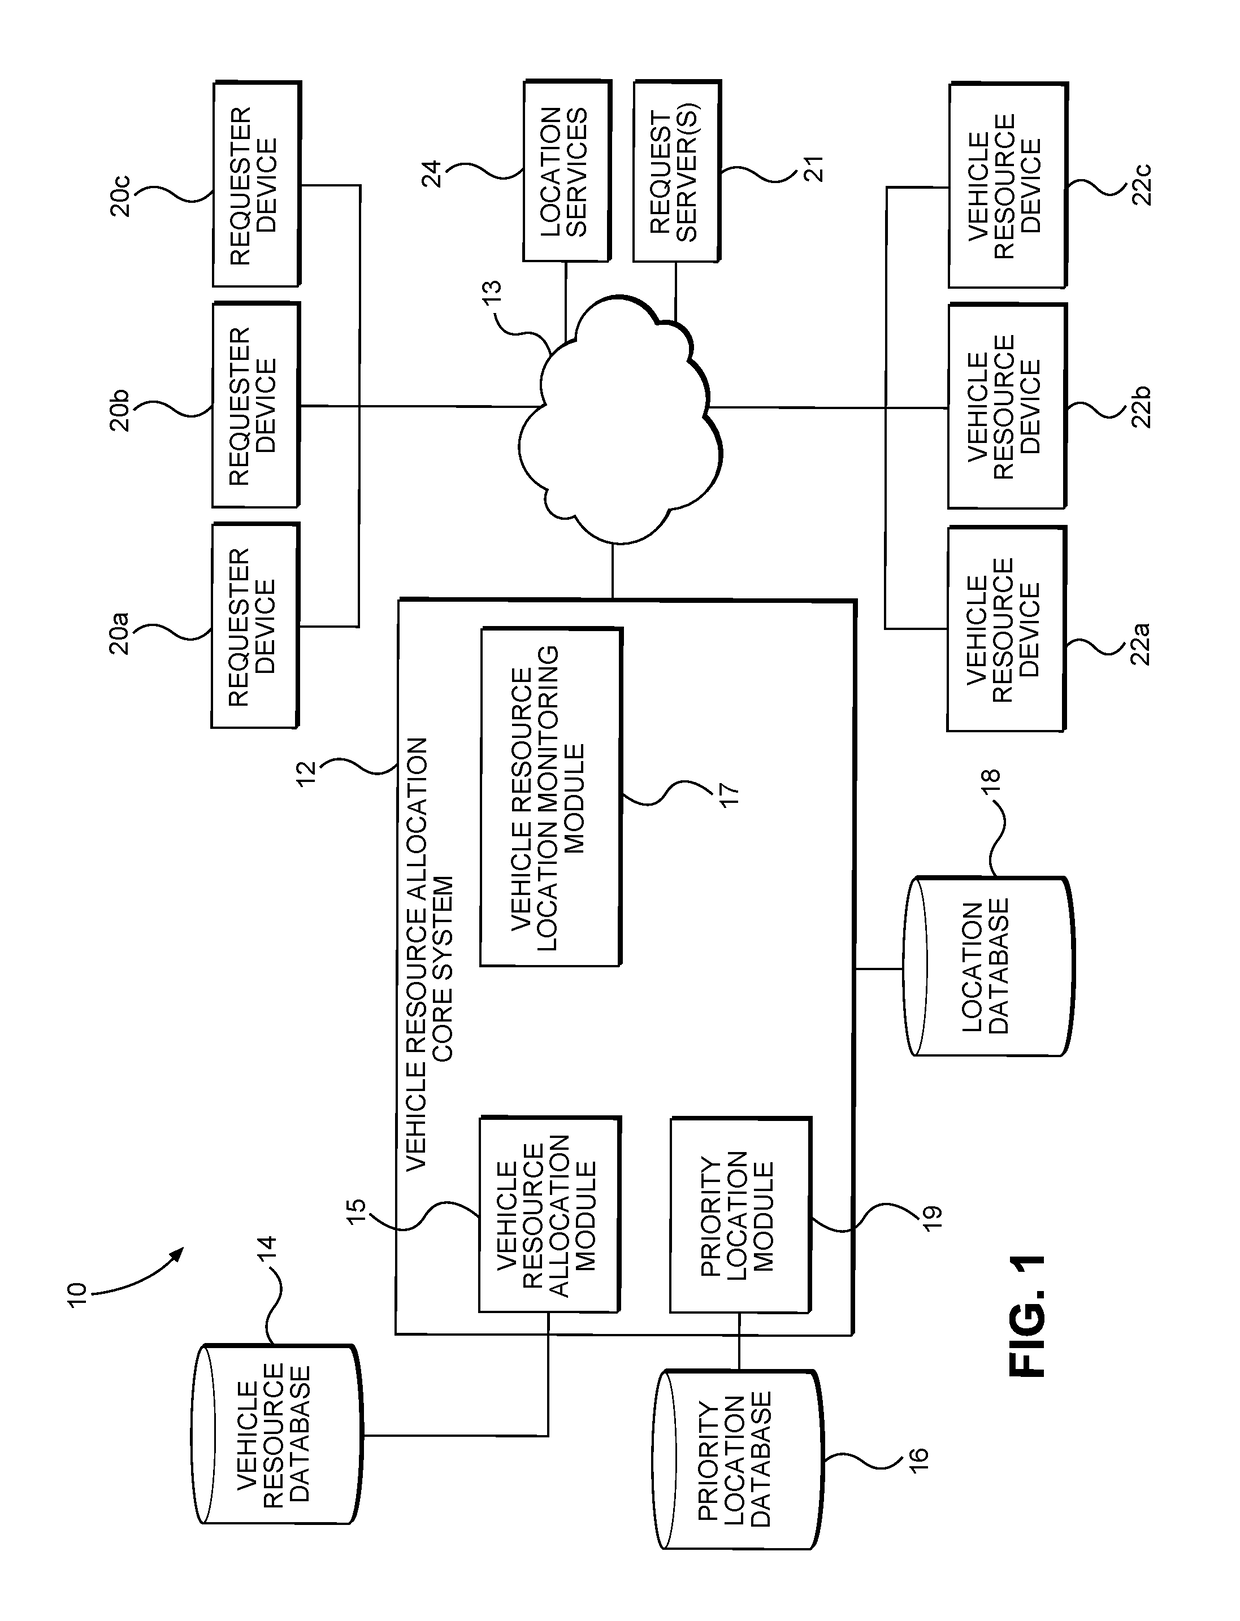 Systems and methods for vehicle resource management